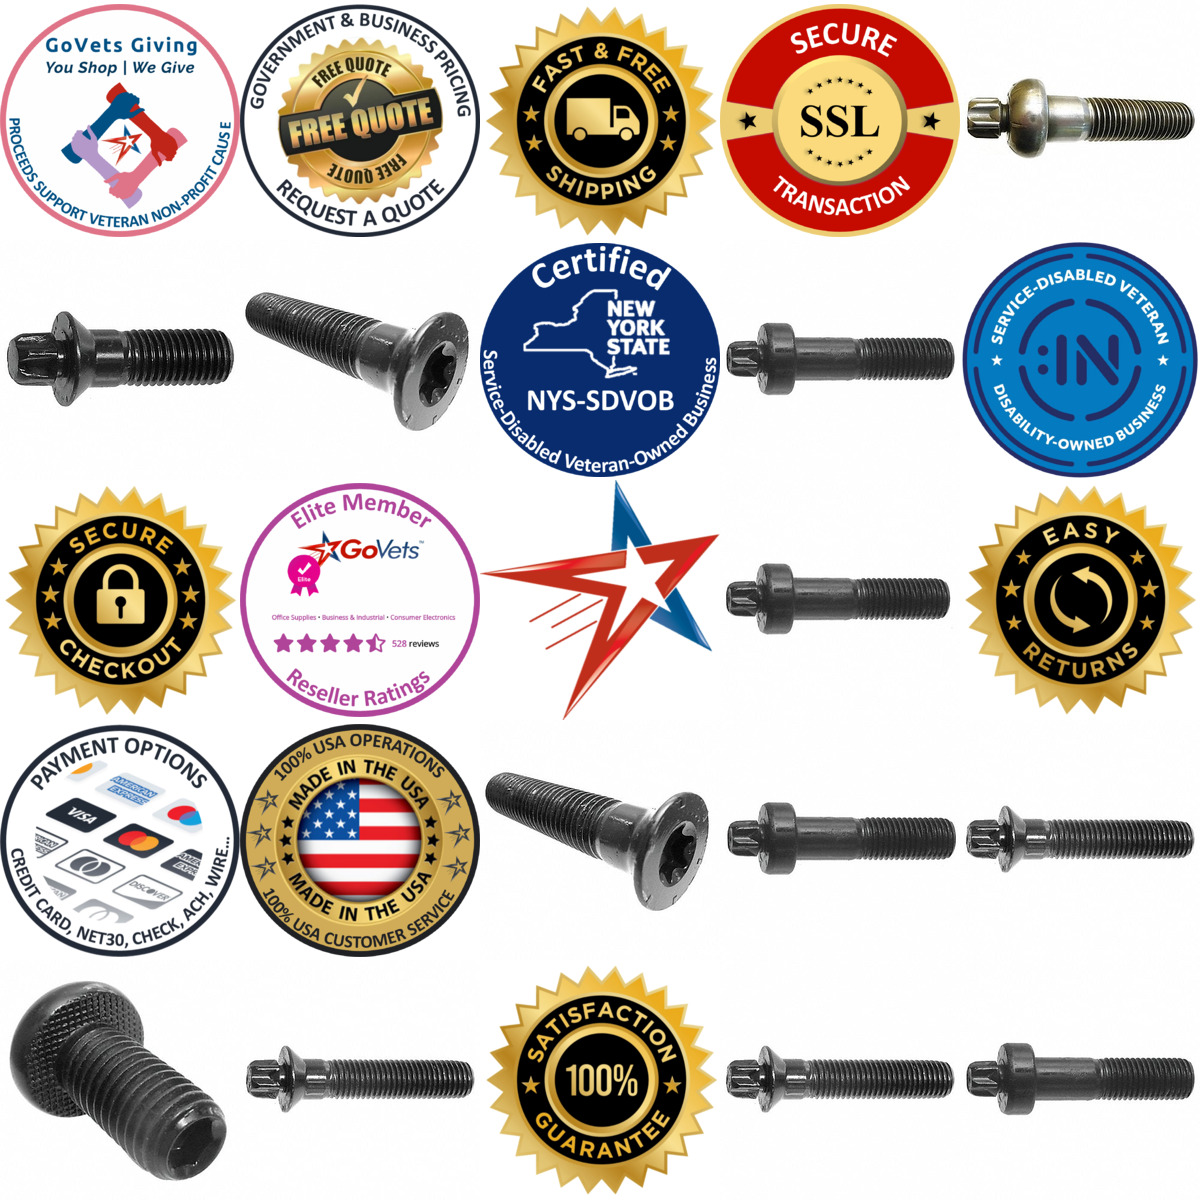 A selection of Freight Car Bolts products on GoVets